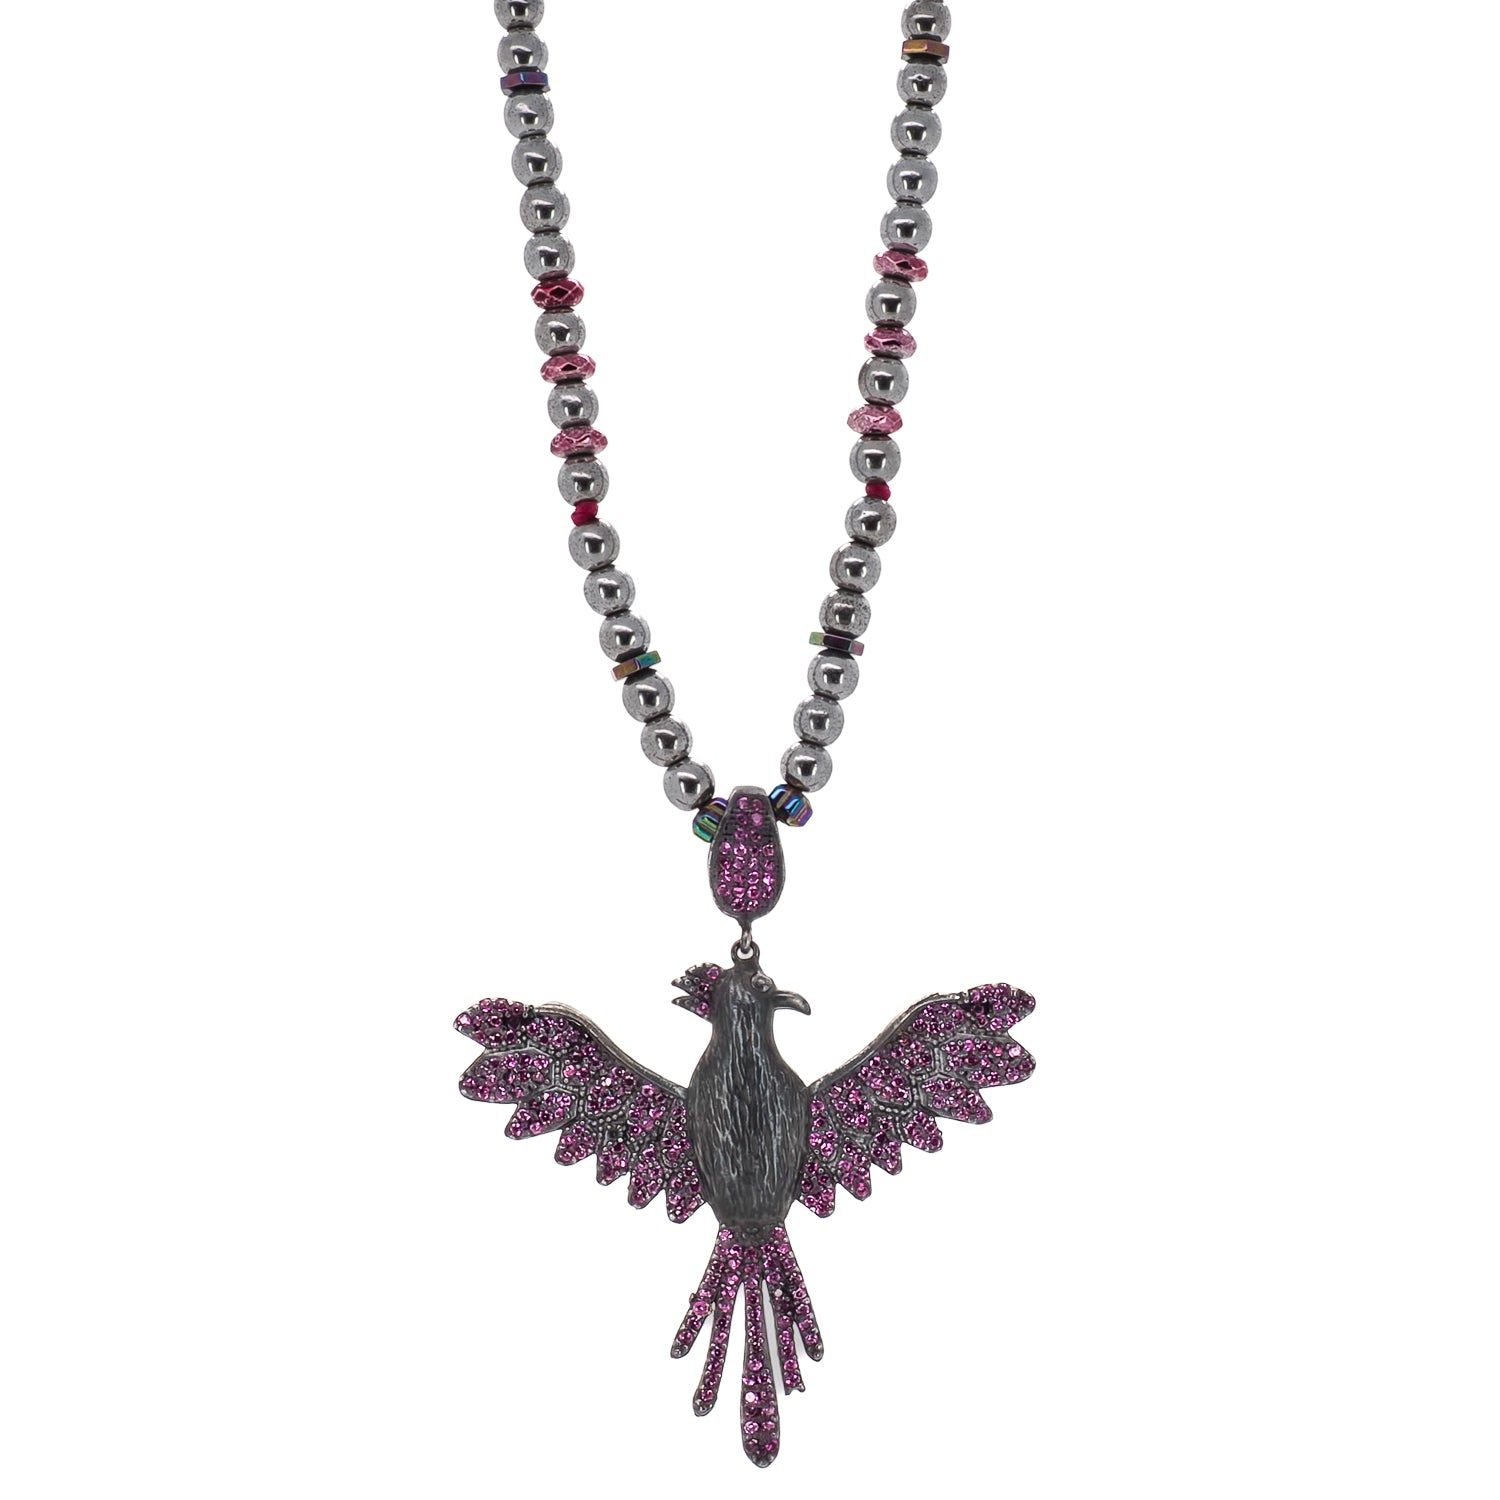 The Inner Rebirth Phoenix Necklace featuring silver hematite stone beads and a handmade Phoenix pendant with Swarovski crystals.